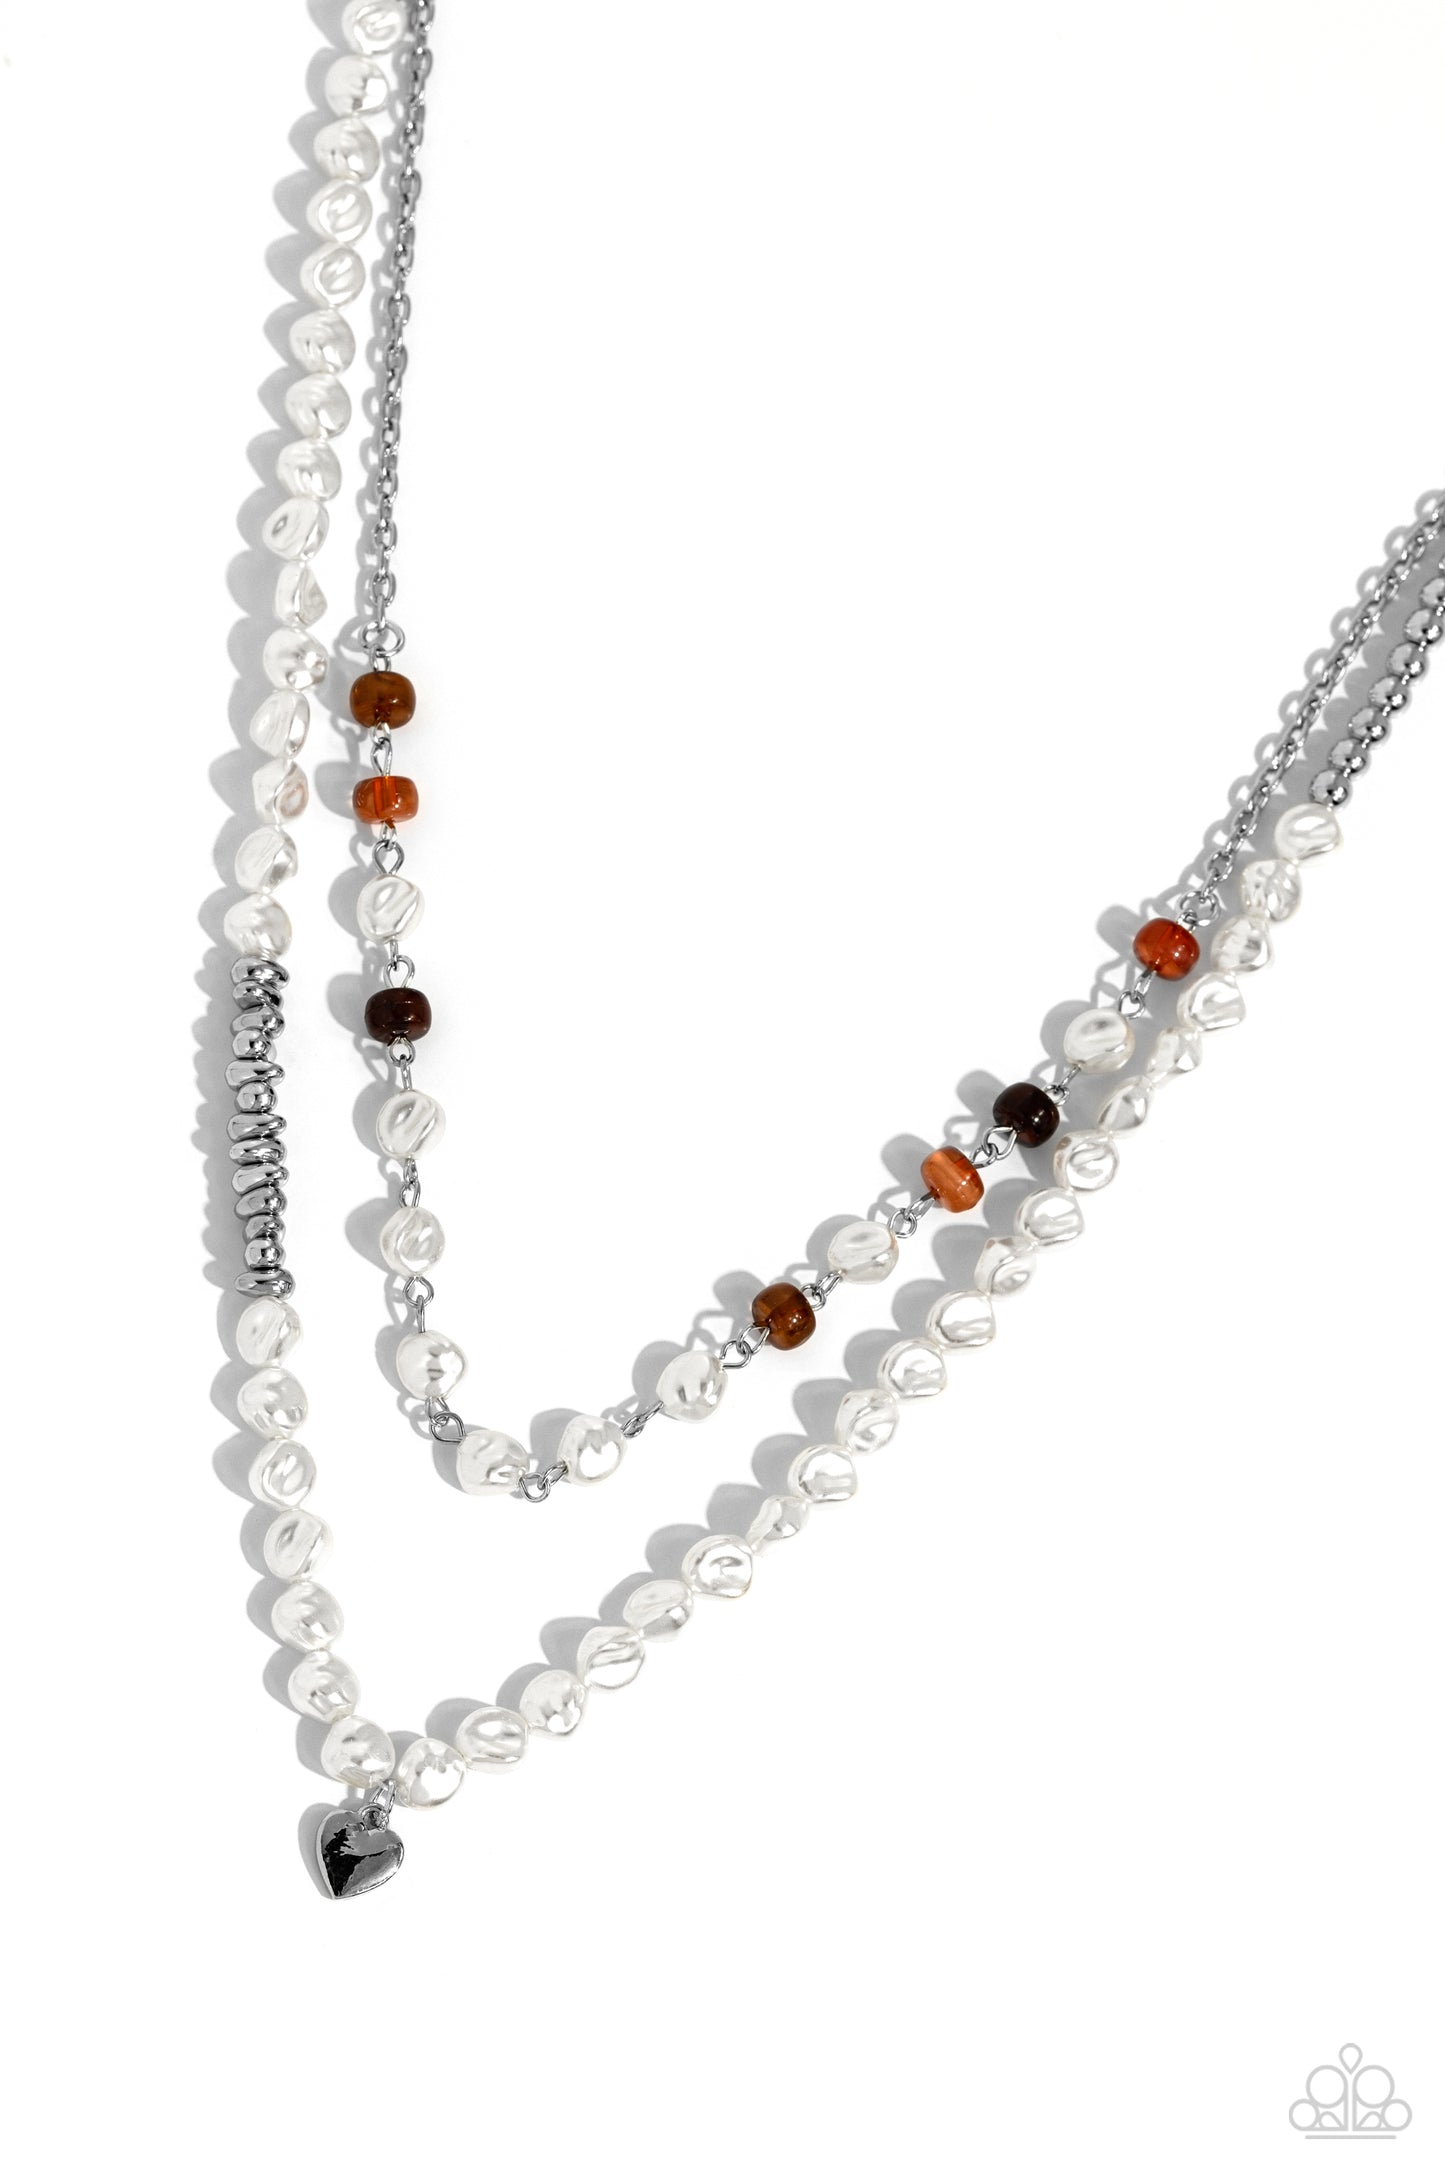 Paparazzi Accessories - Pearl Pact - Brown Necklaces infused with various brown cat's eye discs, a baroque pearl beaded strand gives way to an elongated baroque pearl and silver beaded strand featuring a dainty silver heart pendant for a whimsically layered look. Features an adjustable clasp closure.  Sold as one individual necklace. Includes one pair of matching earrings.